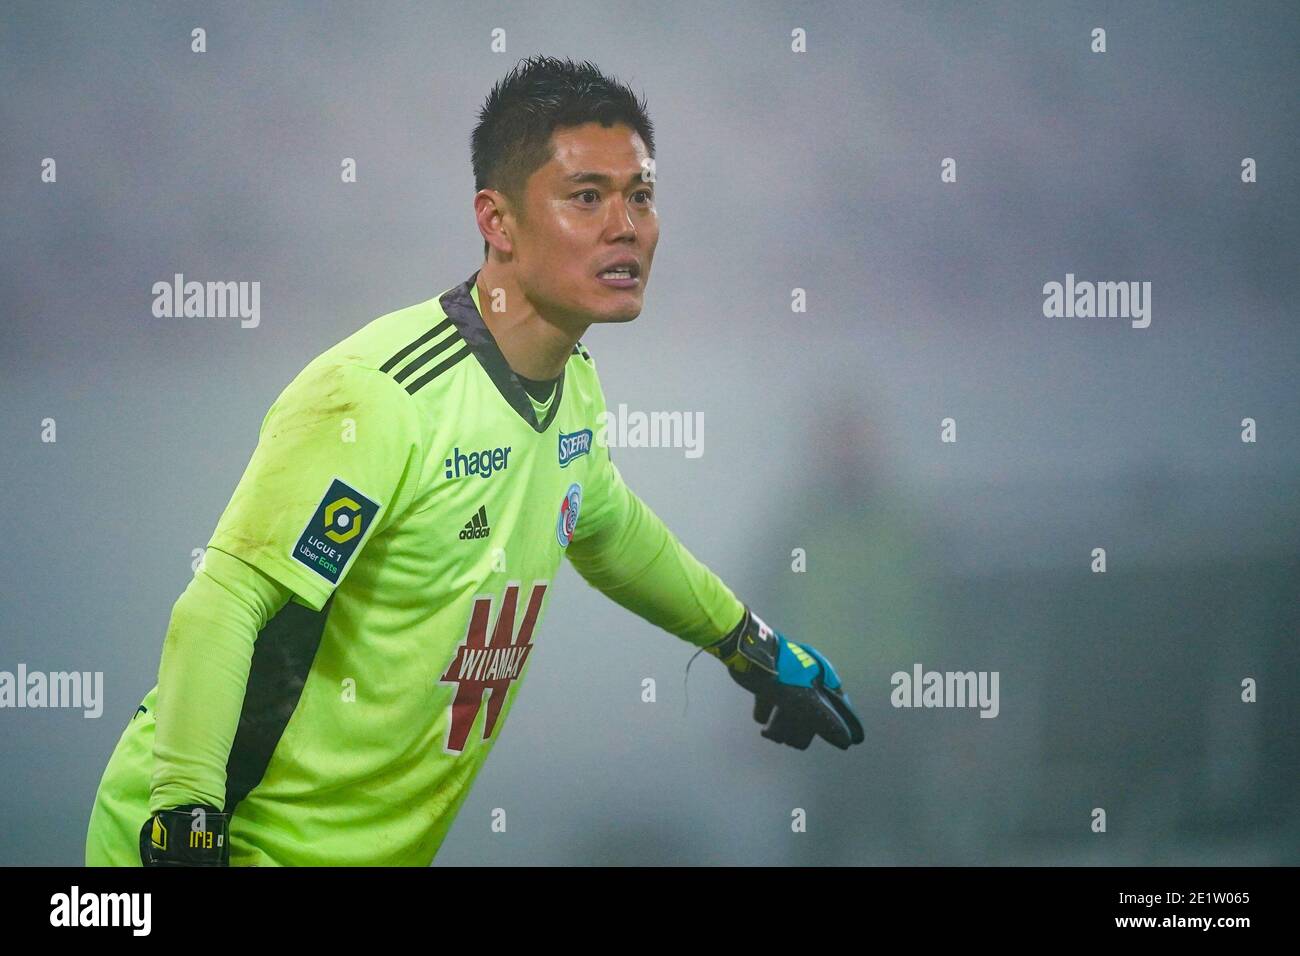 LENS, NETHERLANDS - JANUARY 9: L-R: Eiji Kawashima of RC Strasbourg during the Ligue 1 match between RC Lens and RC Strasbourg at Stade Bollaert-Delel Stock Photo